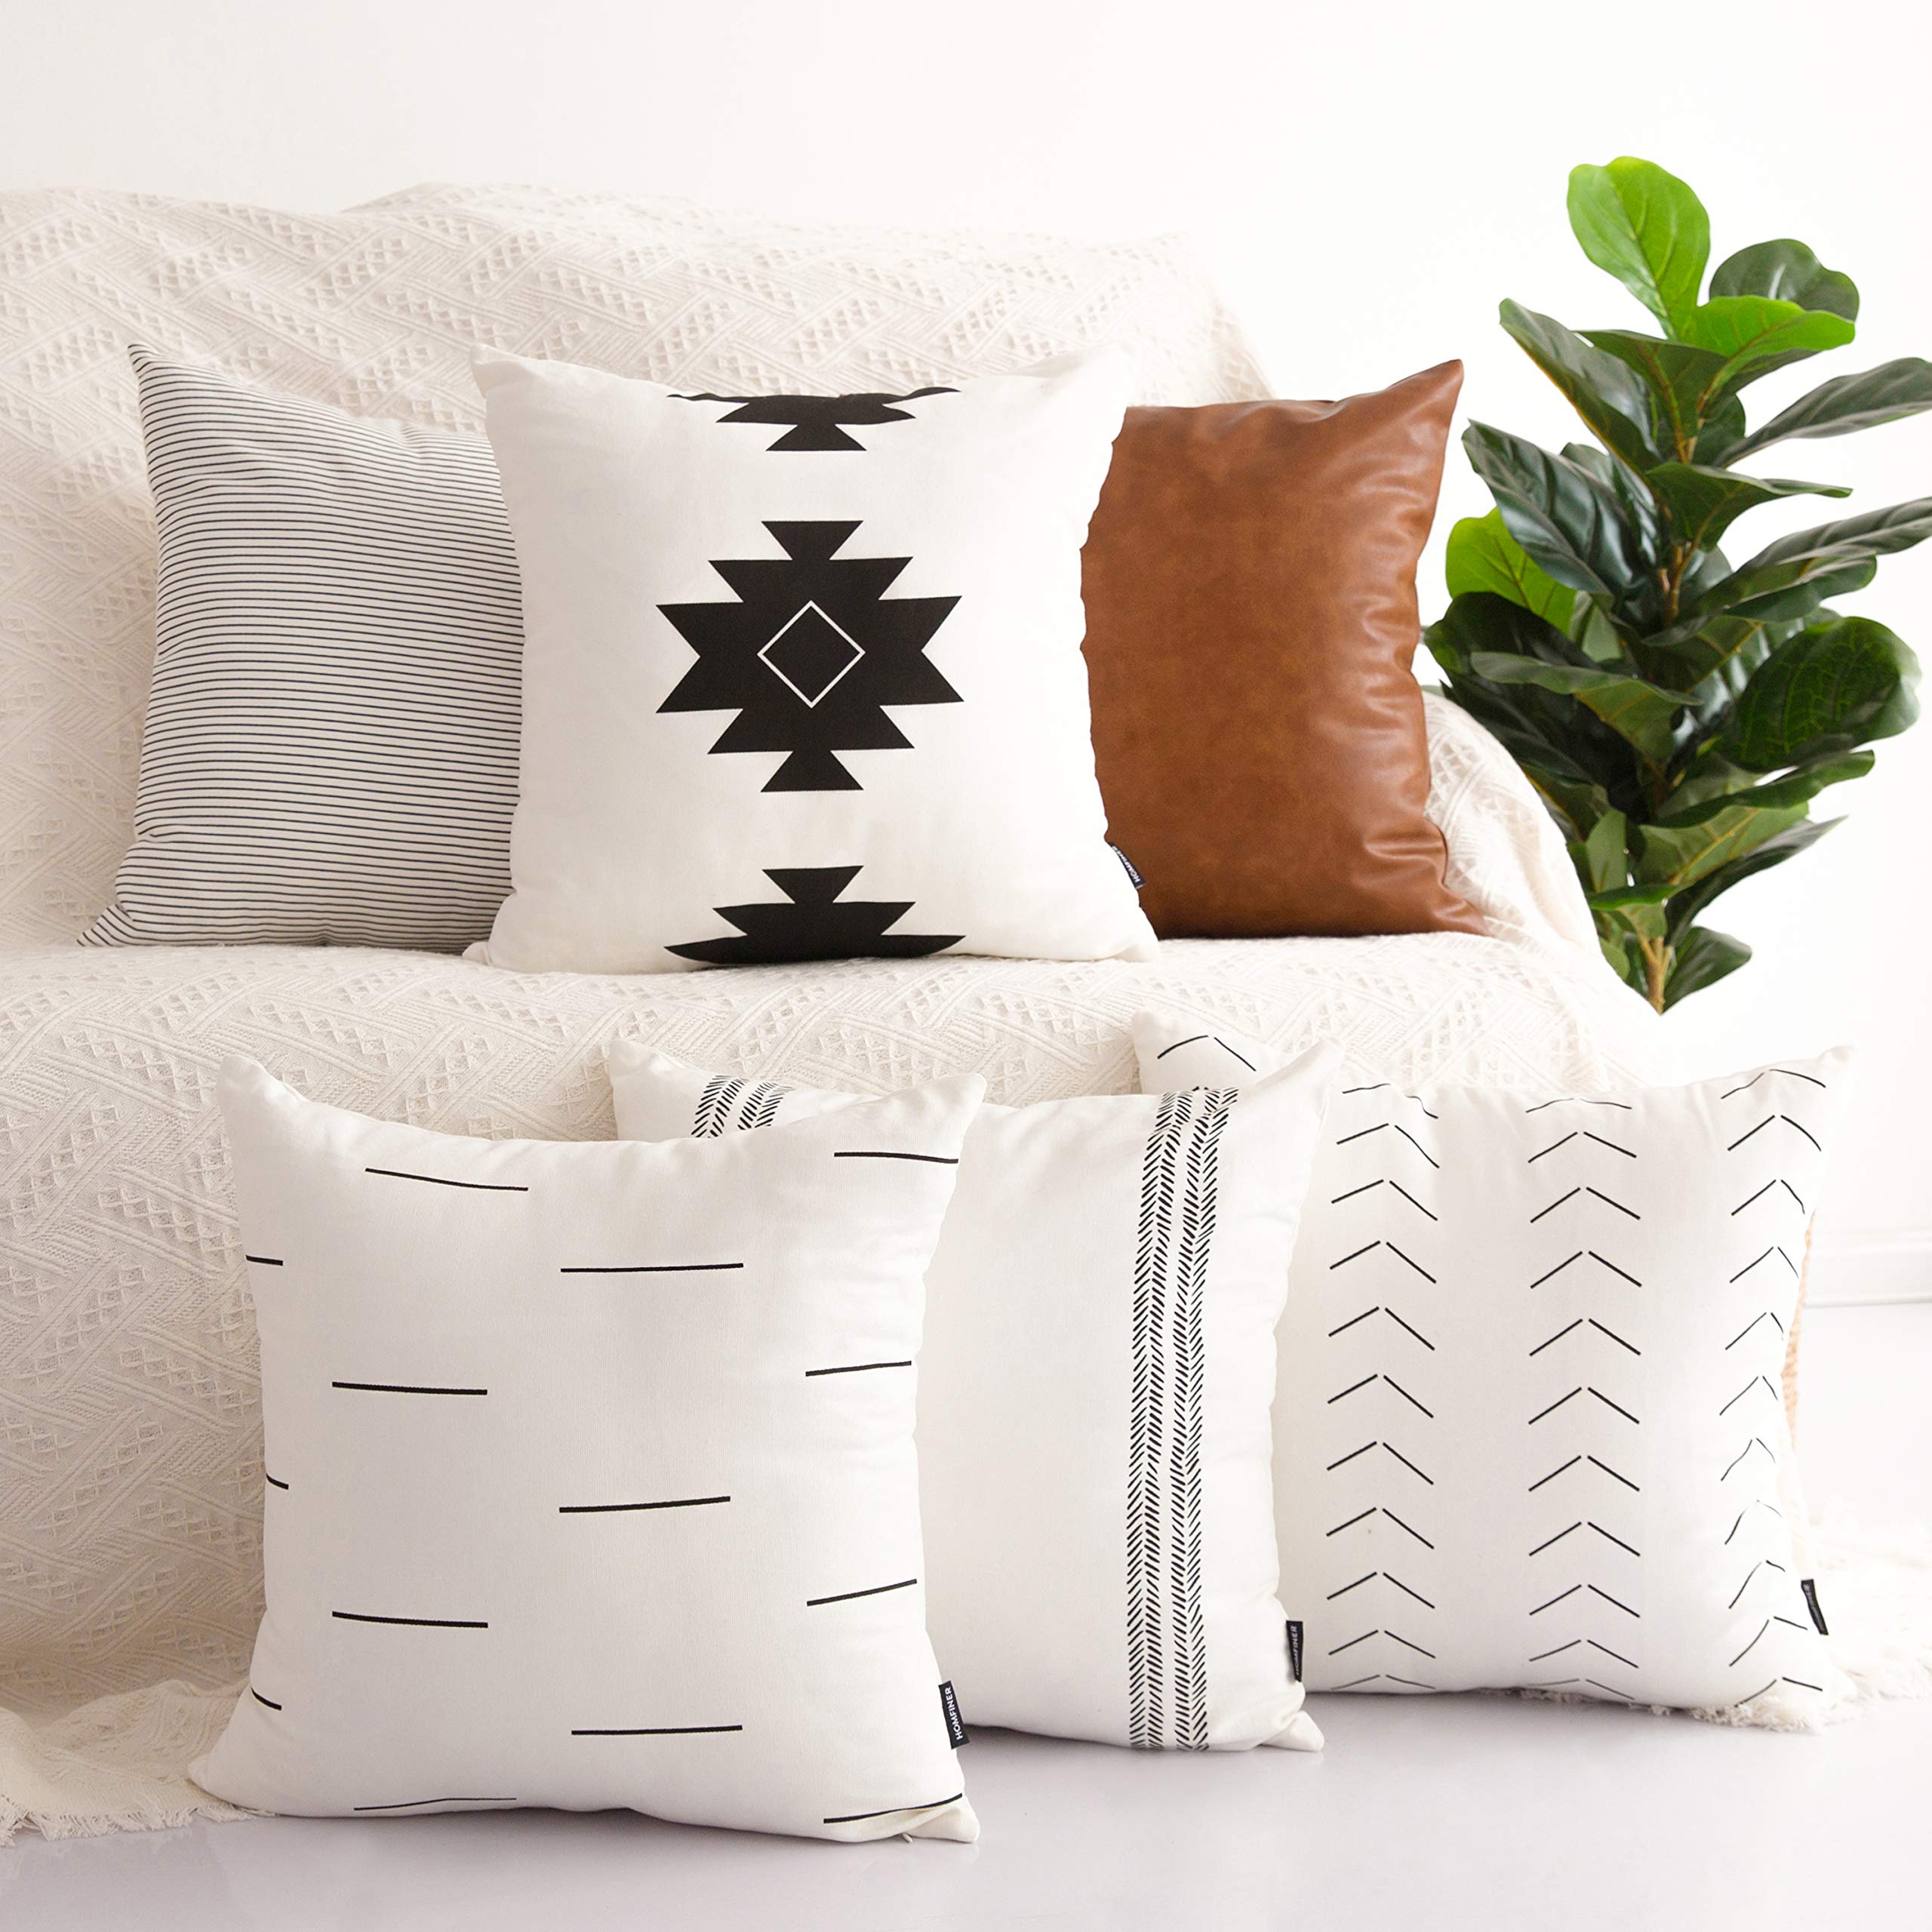 Book Cover HOMFINER Decorative Throw Pillow Covers for Couch, Set of 6, 100% Cotton Modern Design Geometric Stripes Bed or Sofa Pillows Case Faux Leather 18 x 18 inch Set of 6 18 x 18-Inch